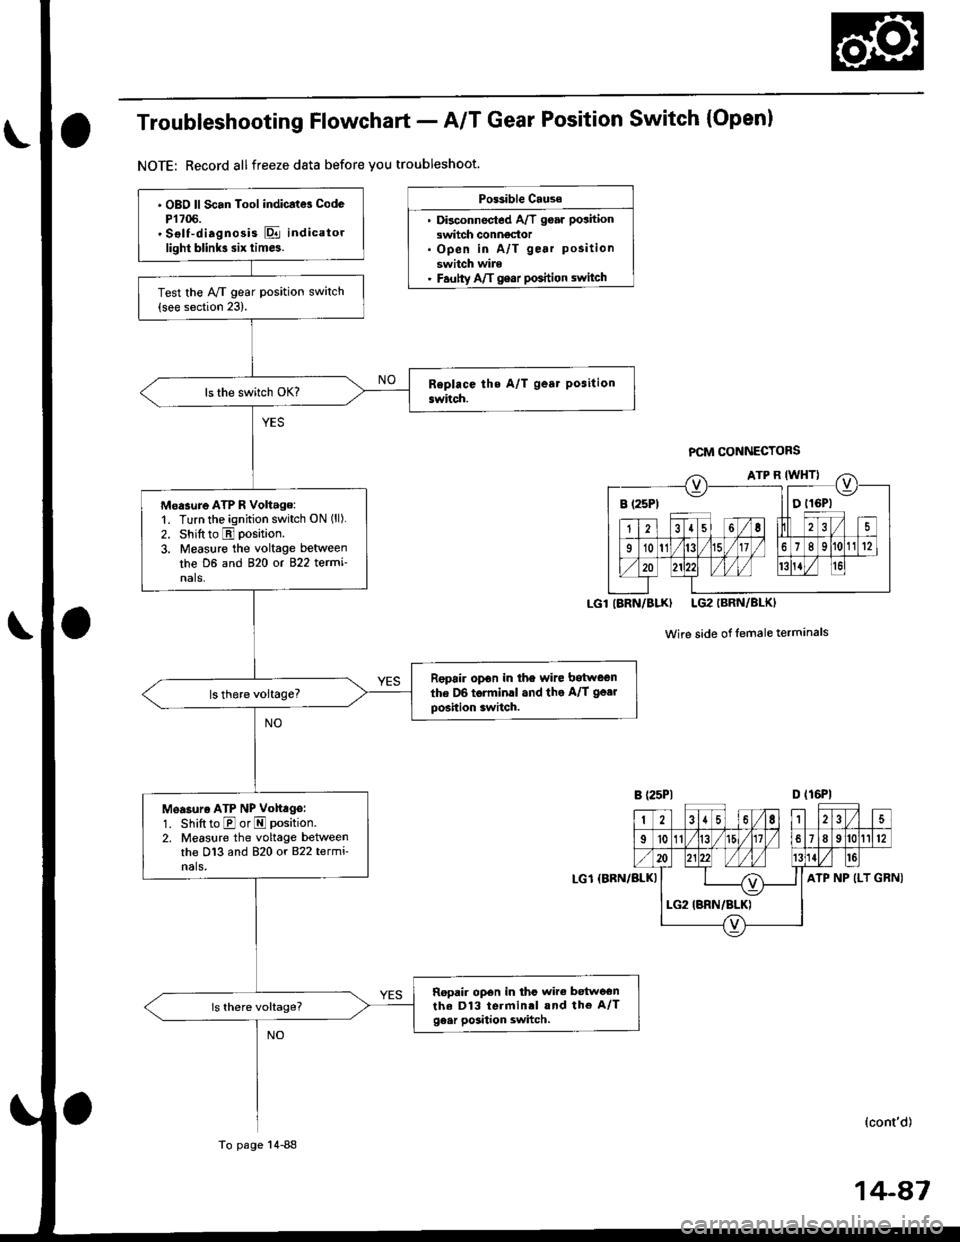 HONDA CIVIC 1999 6.G User Guide Troubleshooting Flowchart - A/T Gear Position Switch (Open)
NOTE: Record allfreeze data before you troubleshoot.
Po$ible Cause
. Disconnectod A/T goar position
switch conngdor. Open in A/T gear positi